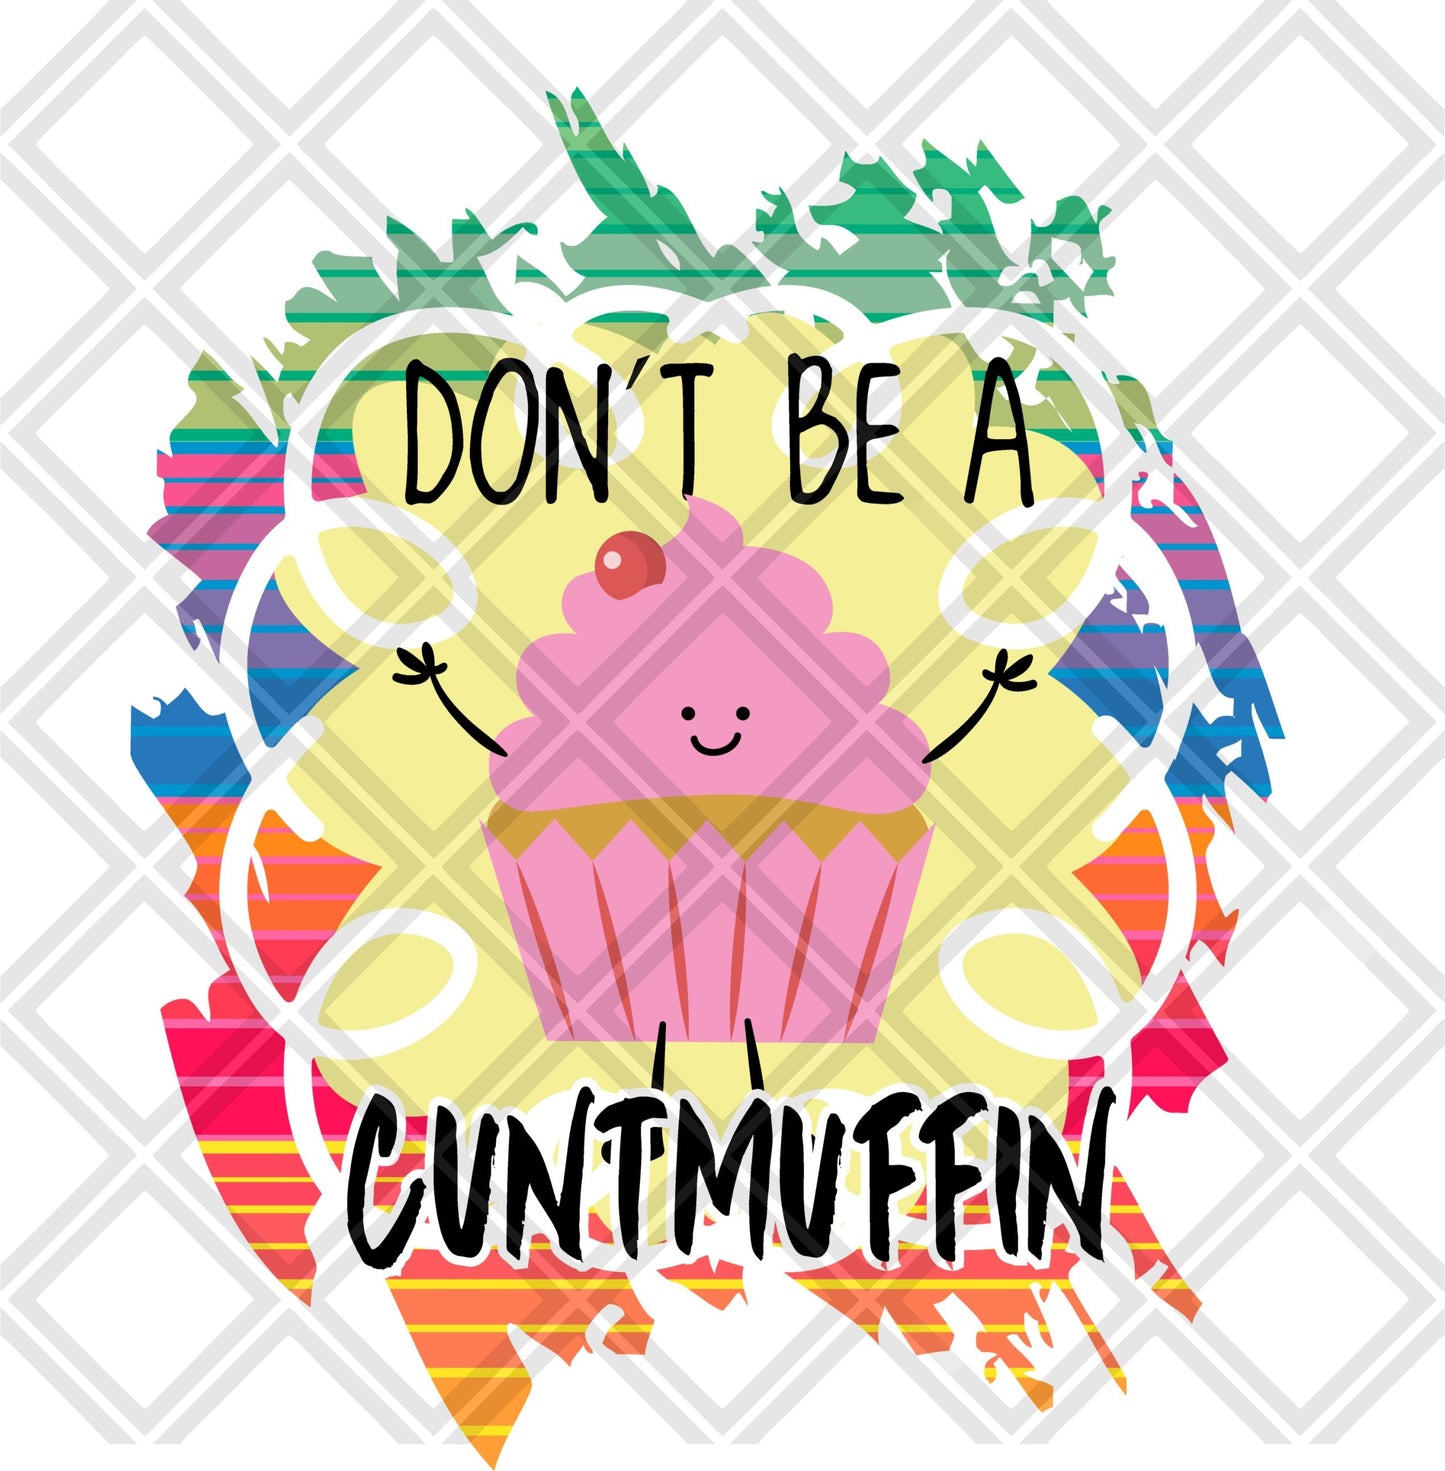 Dont be a cuntmuffin frame Digital Download Instand Download